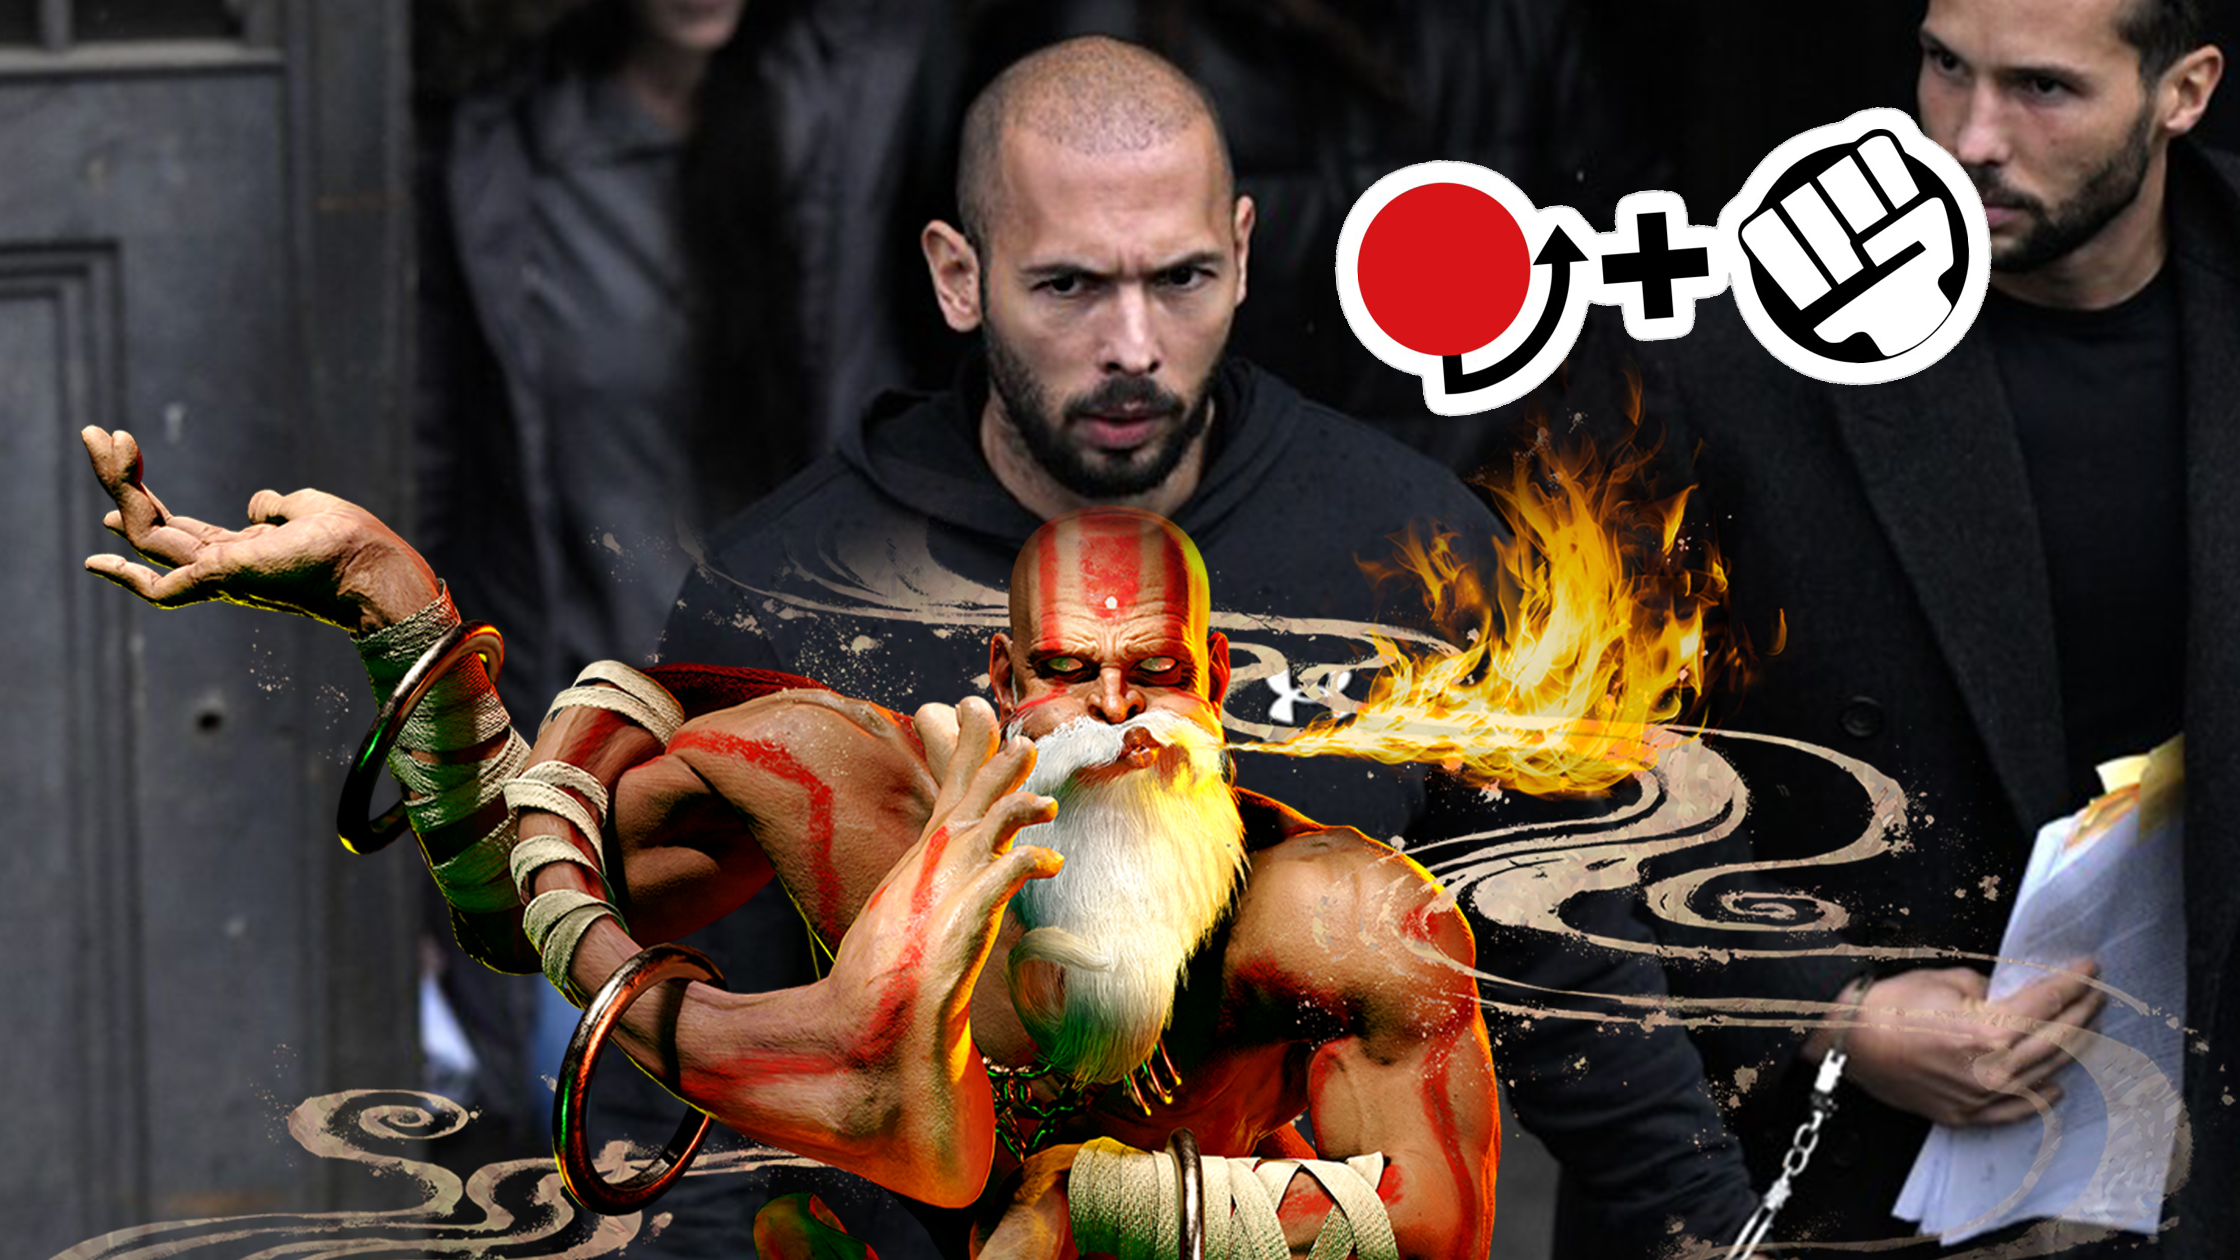 Andrew-Tate-Yoga-Fire-Dhalsim